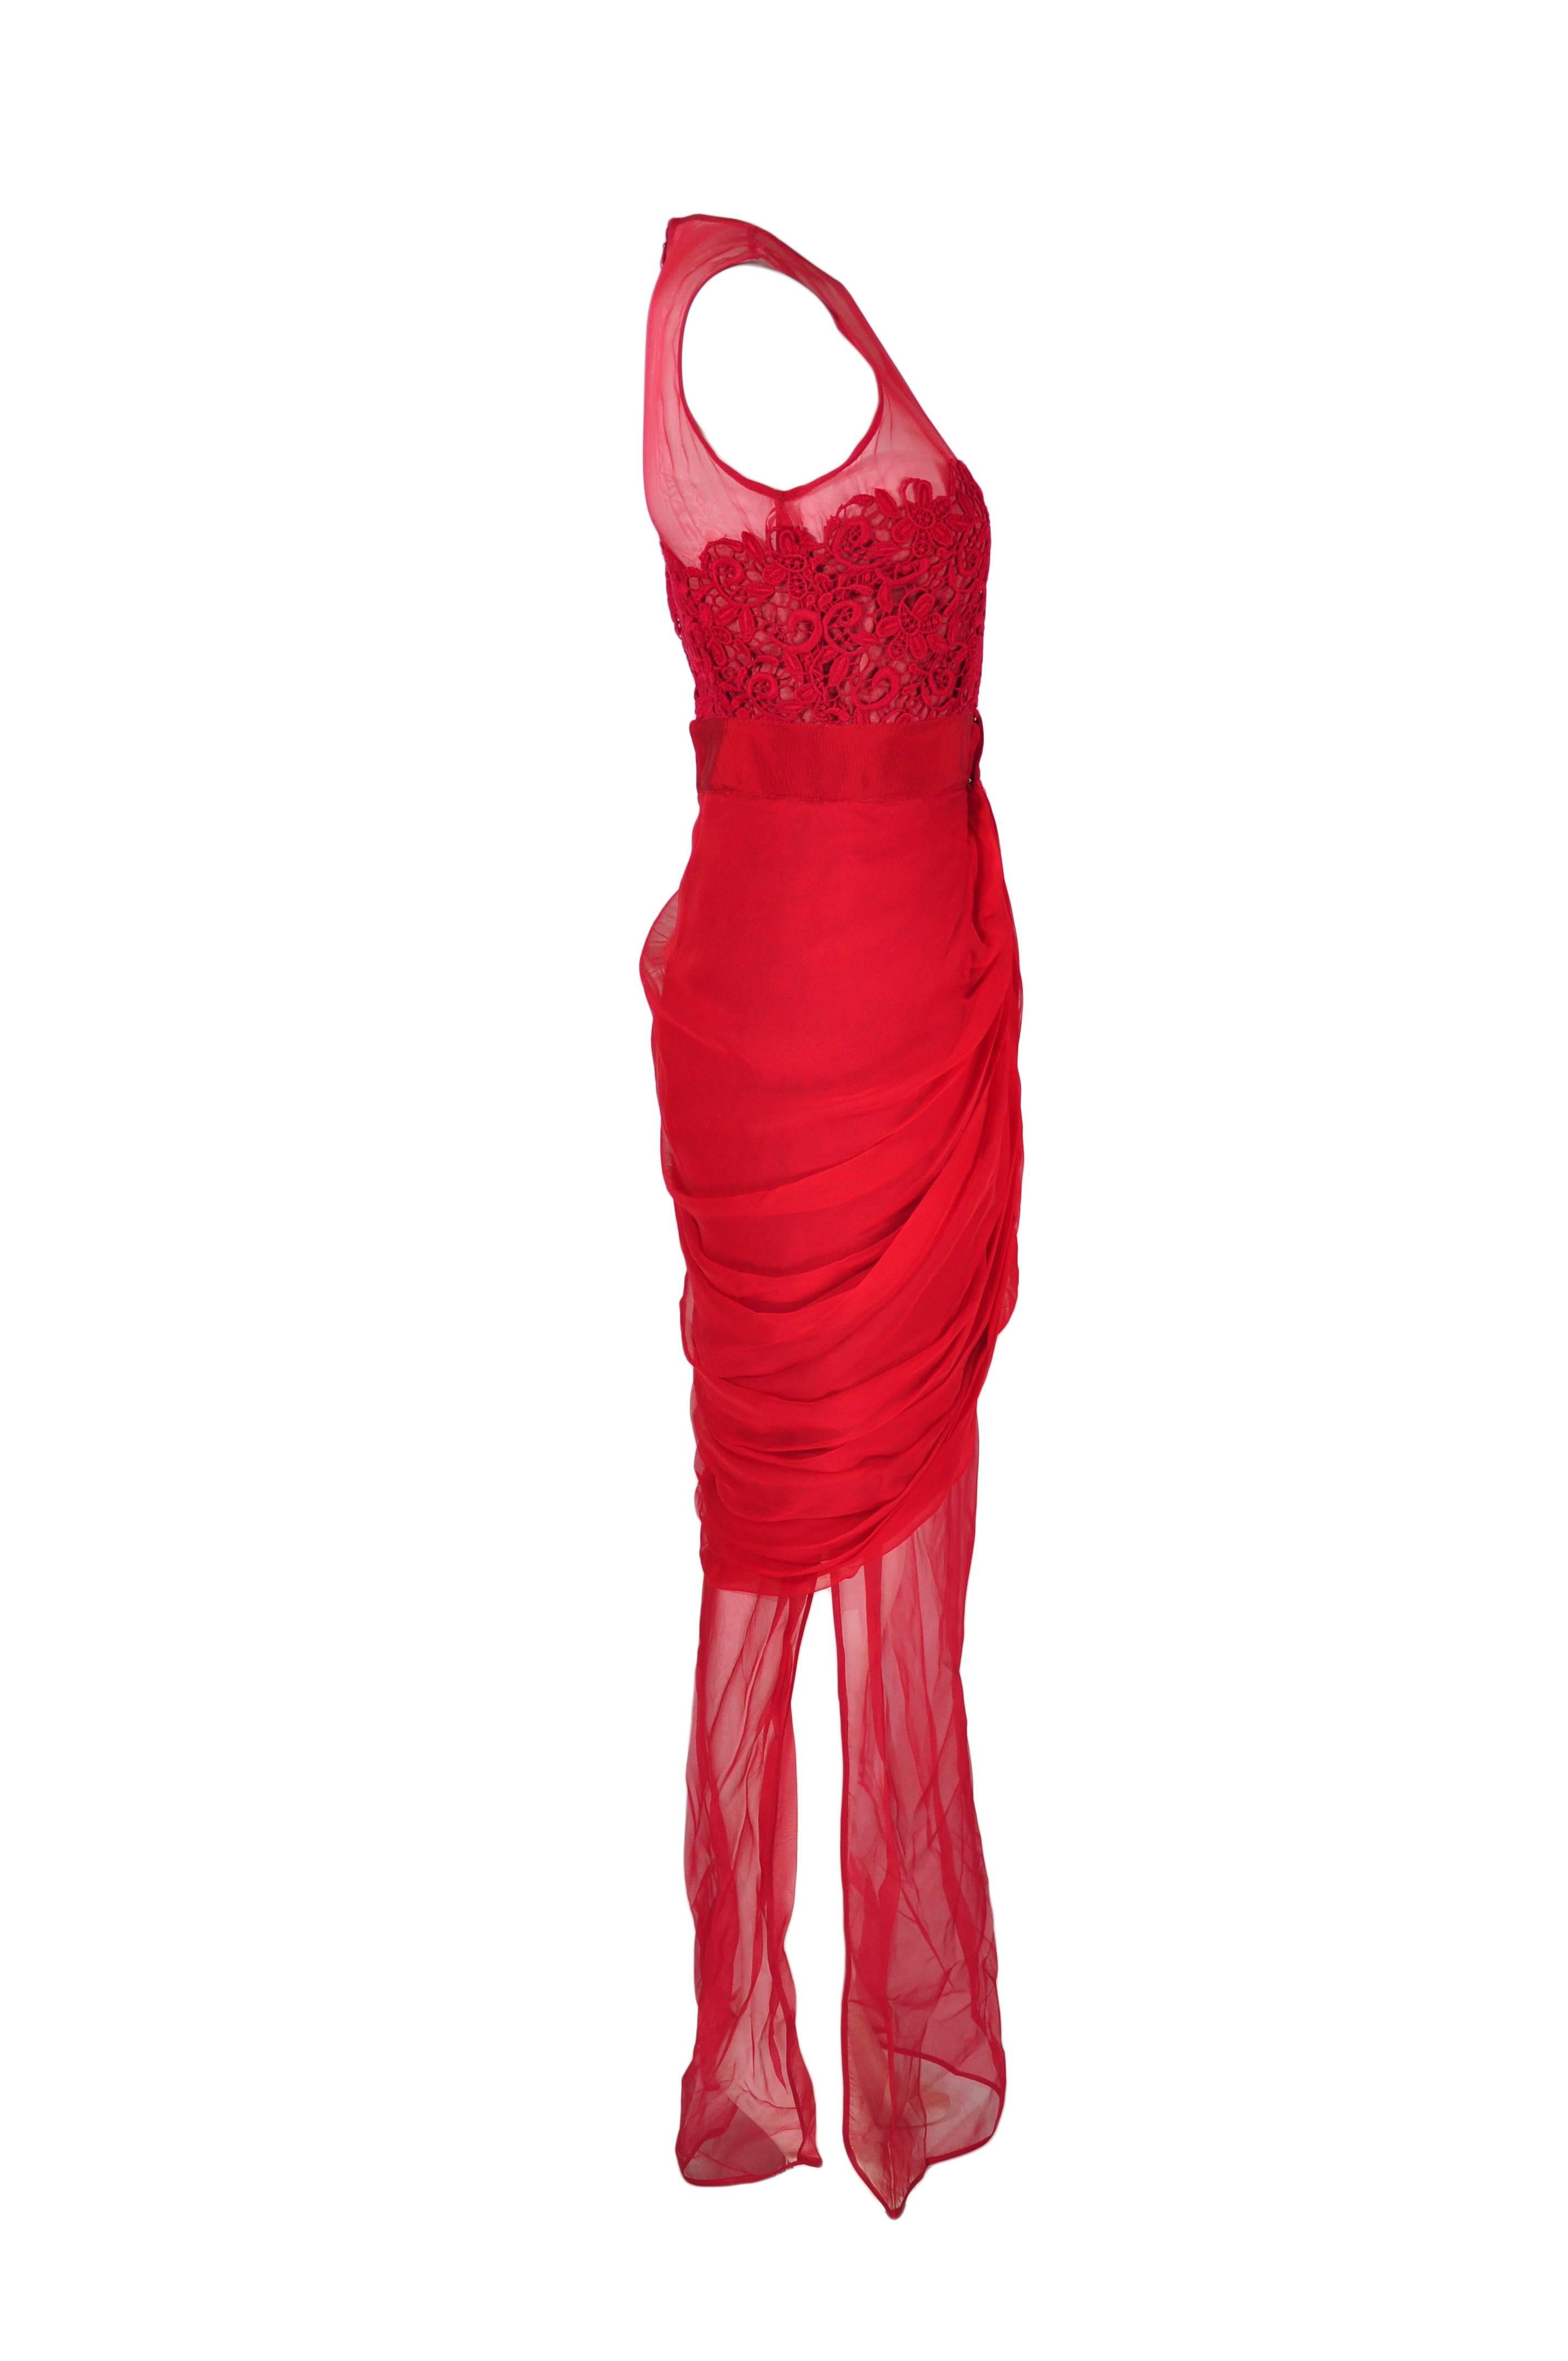 Women's Giambattista Valli Red & Sheer Guipure Lace Appliqued Evening Dress For Sale